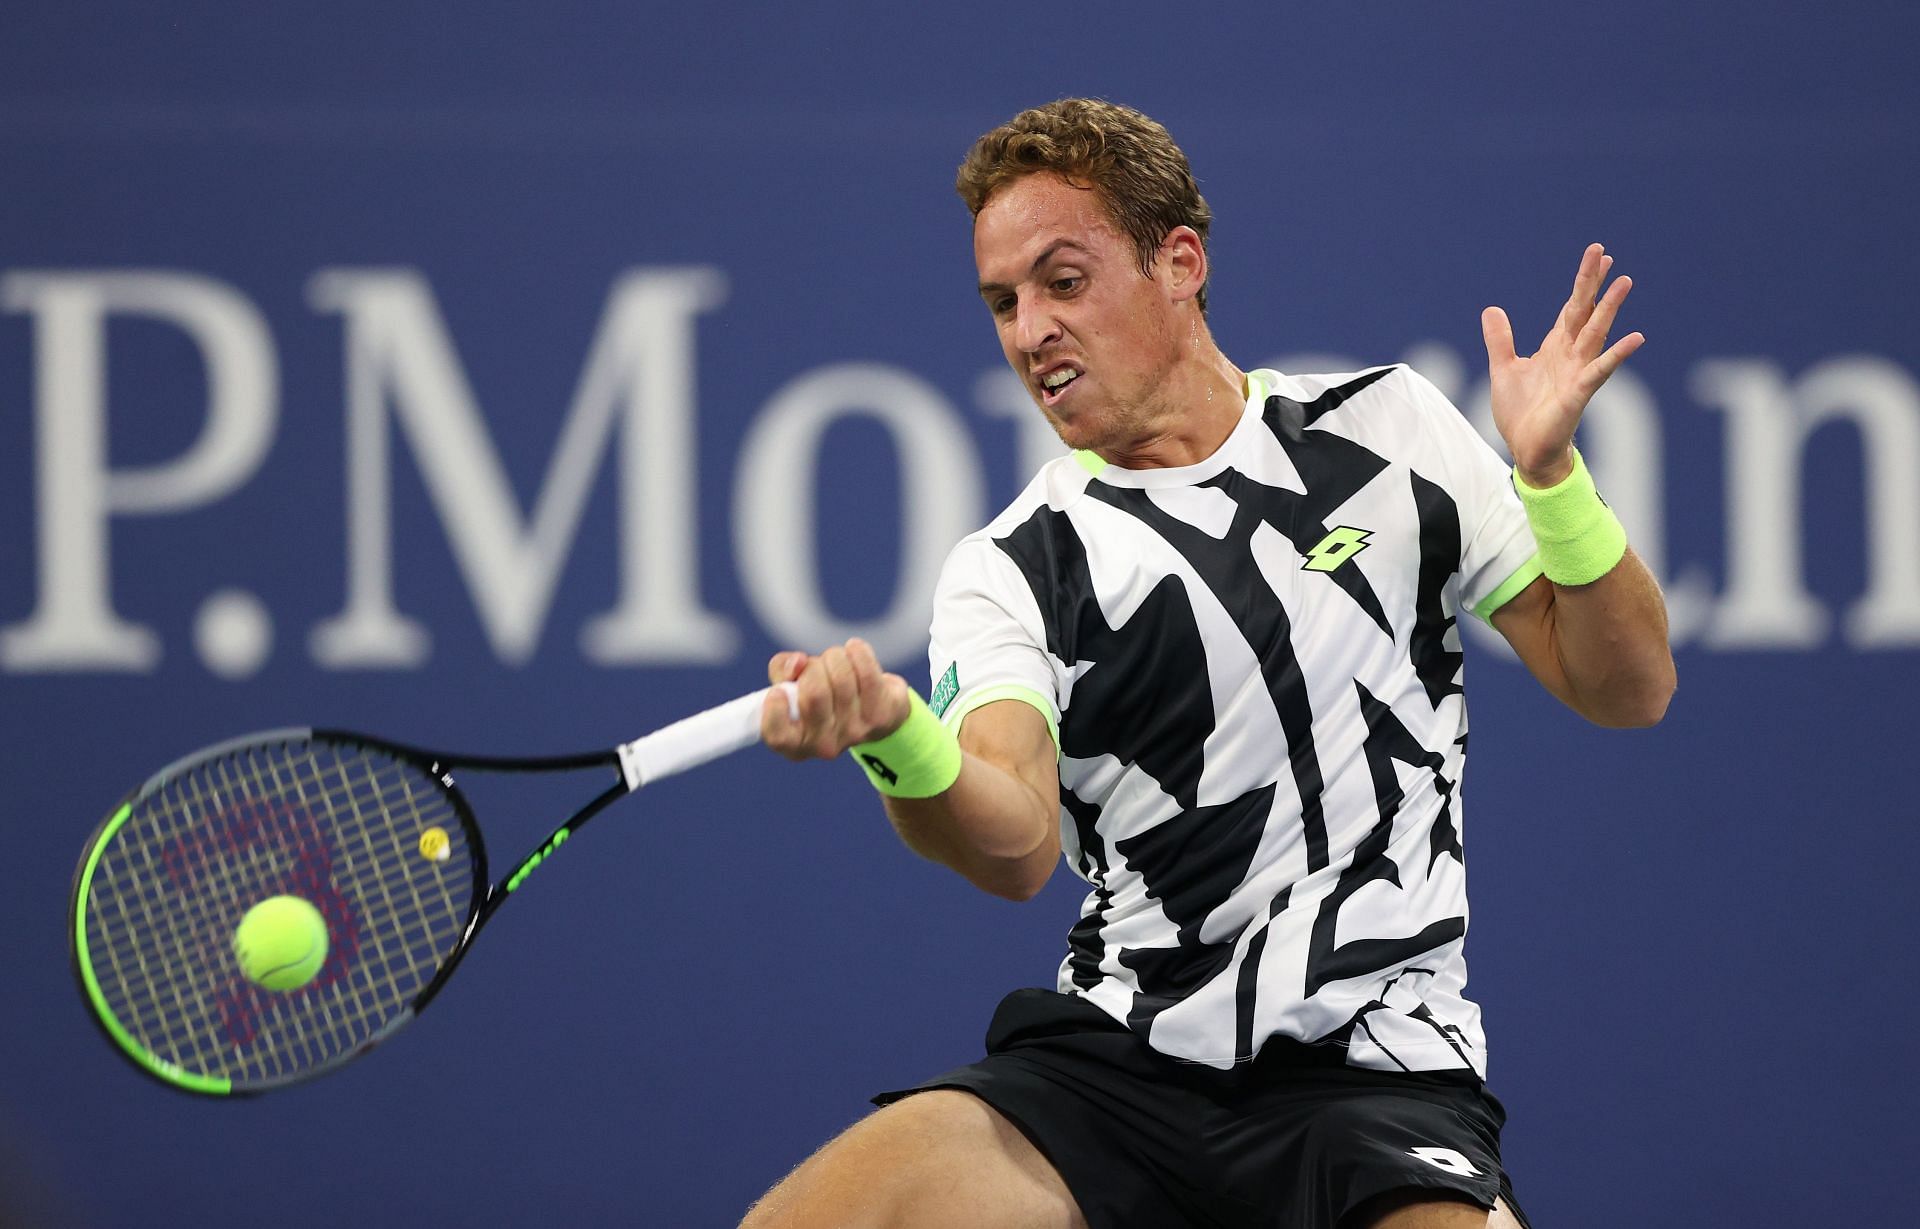 Roberto Carballes Baena in action at 2021 US Open